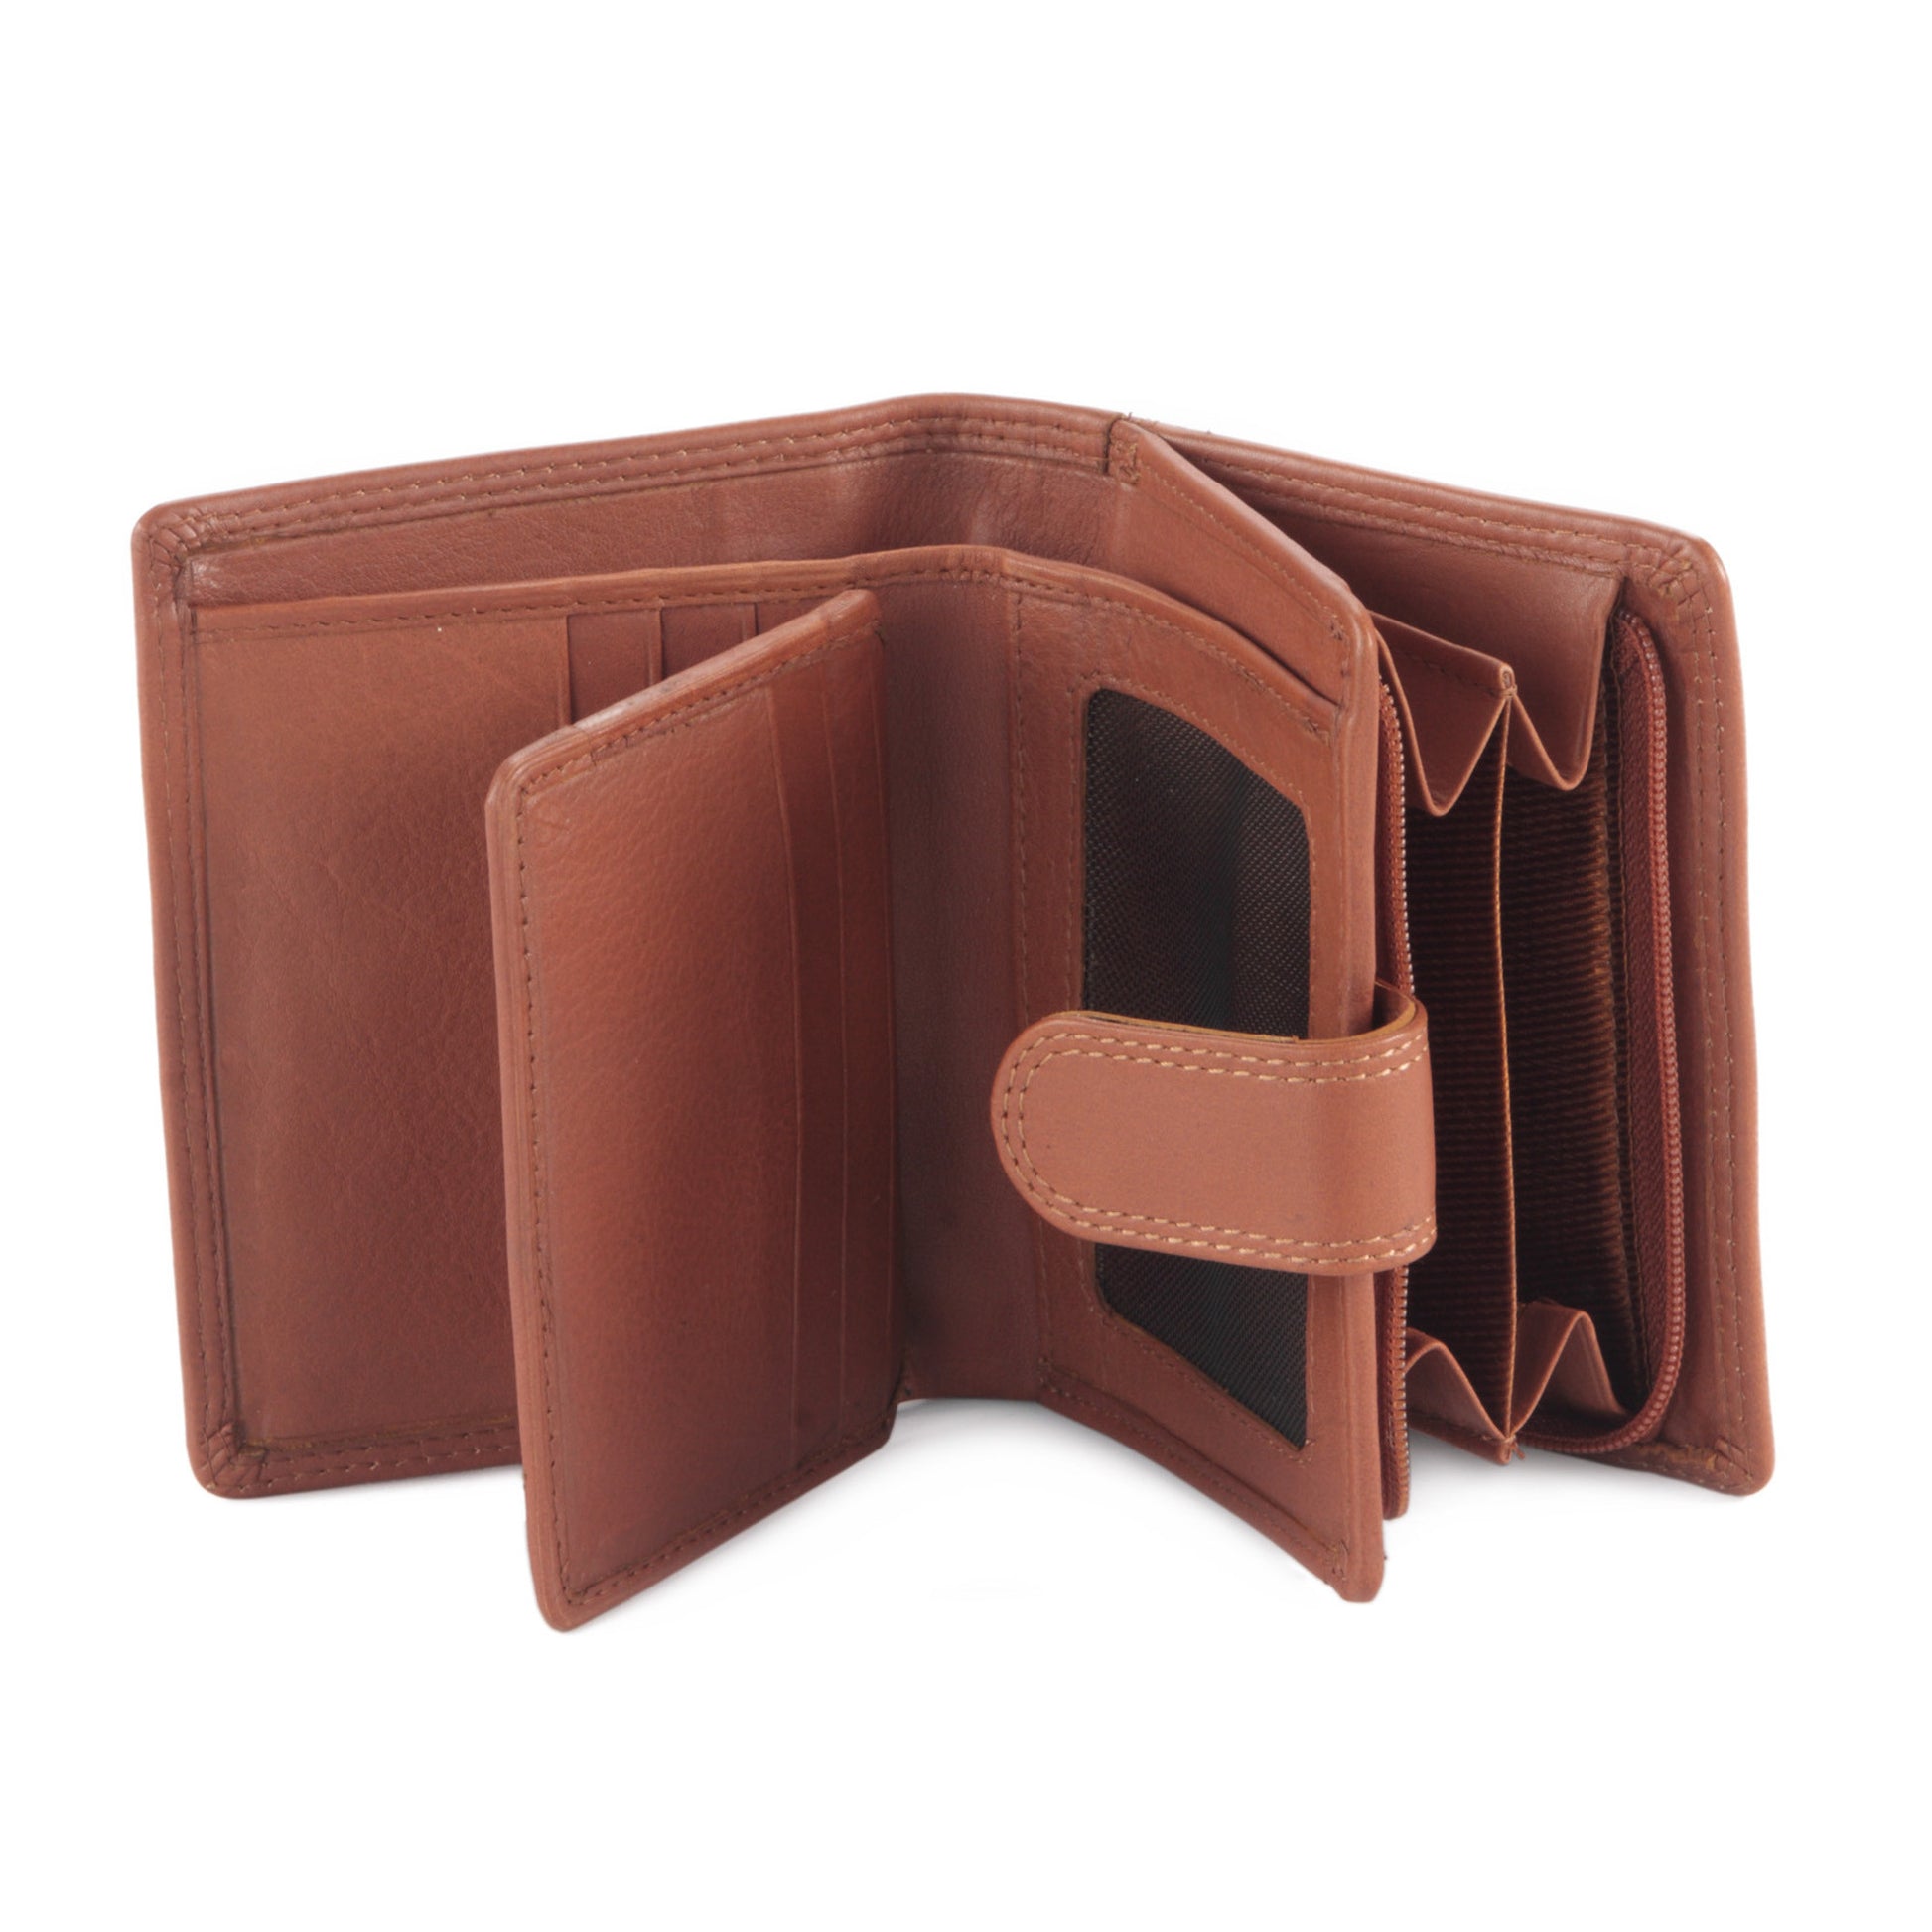 Style n Craft - 300952-CG Small Clutch Wallet for Ladies in Leather - tan or cognac color - open view 2